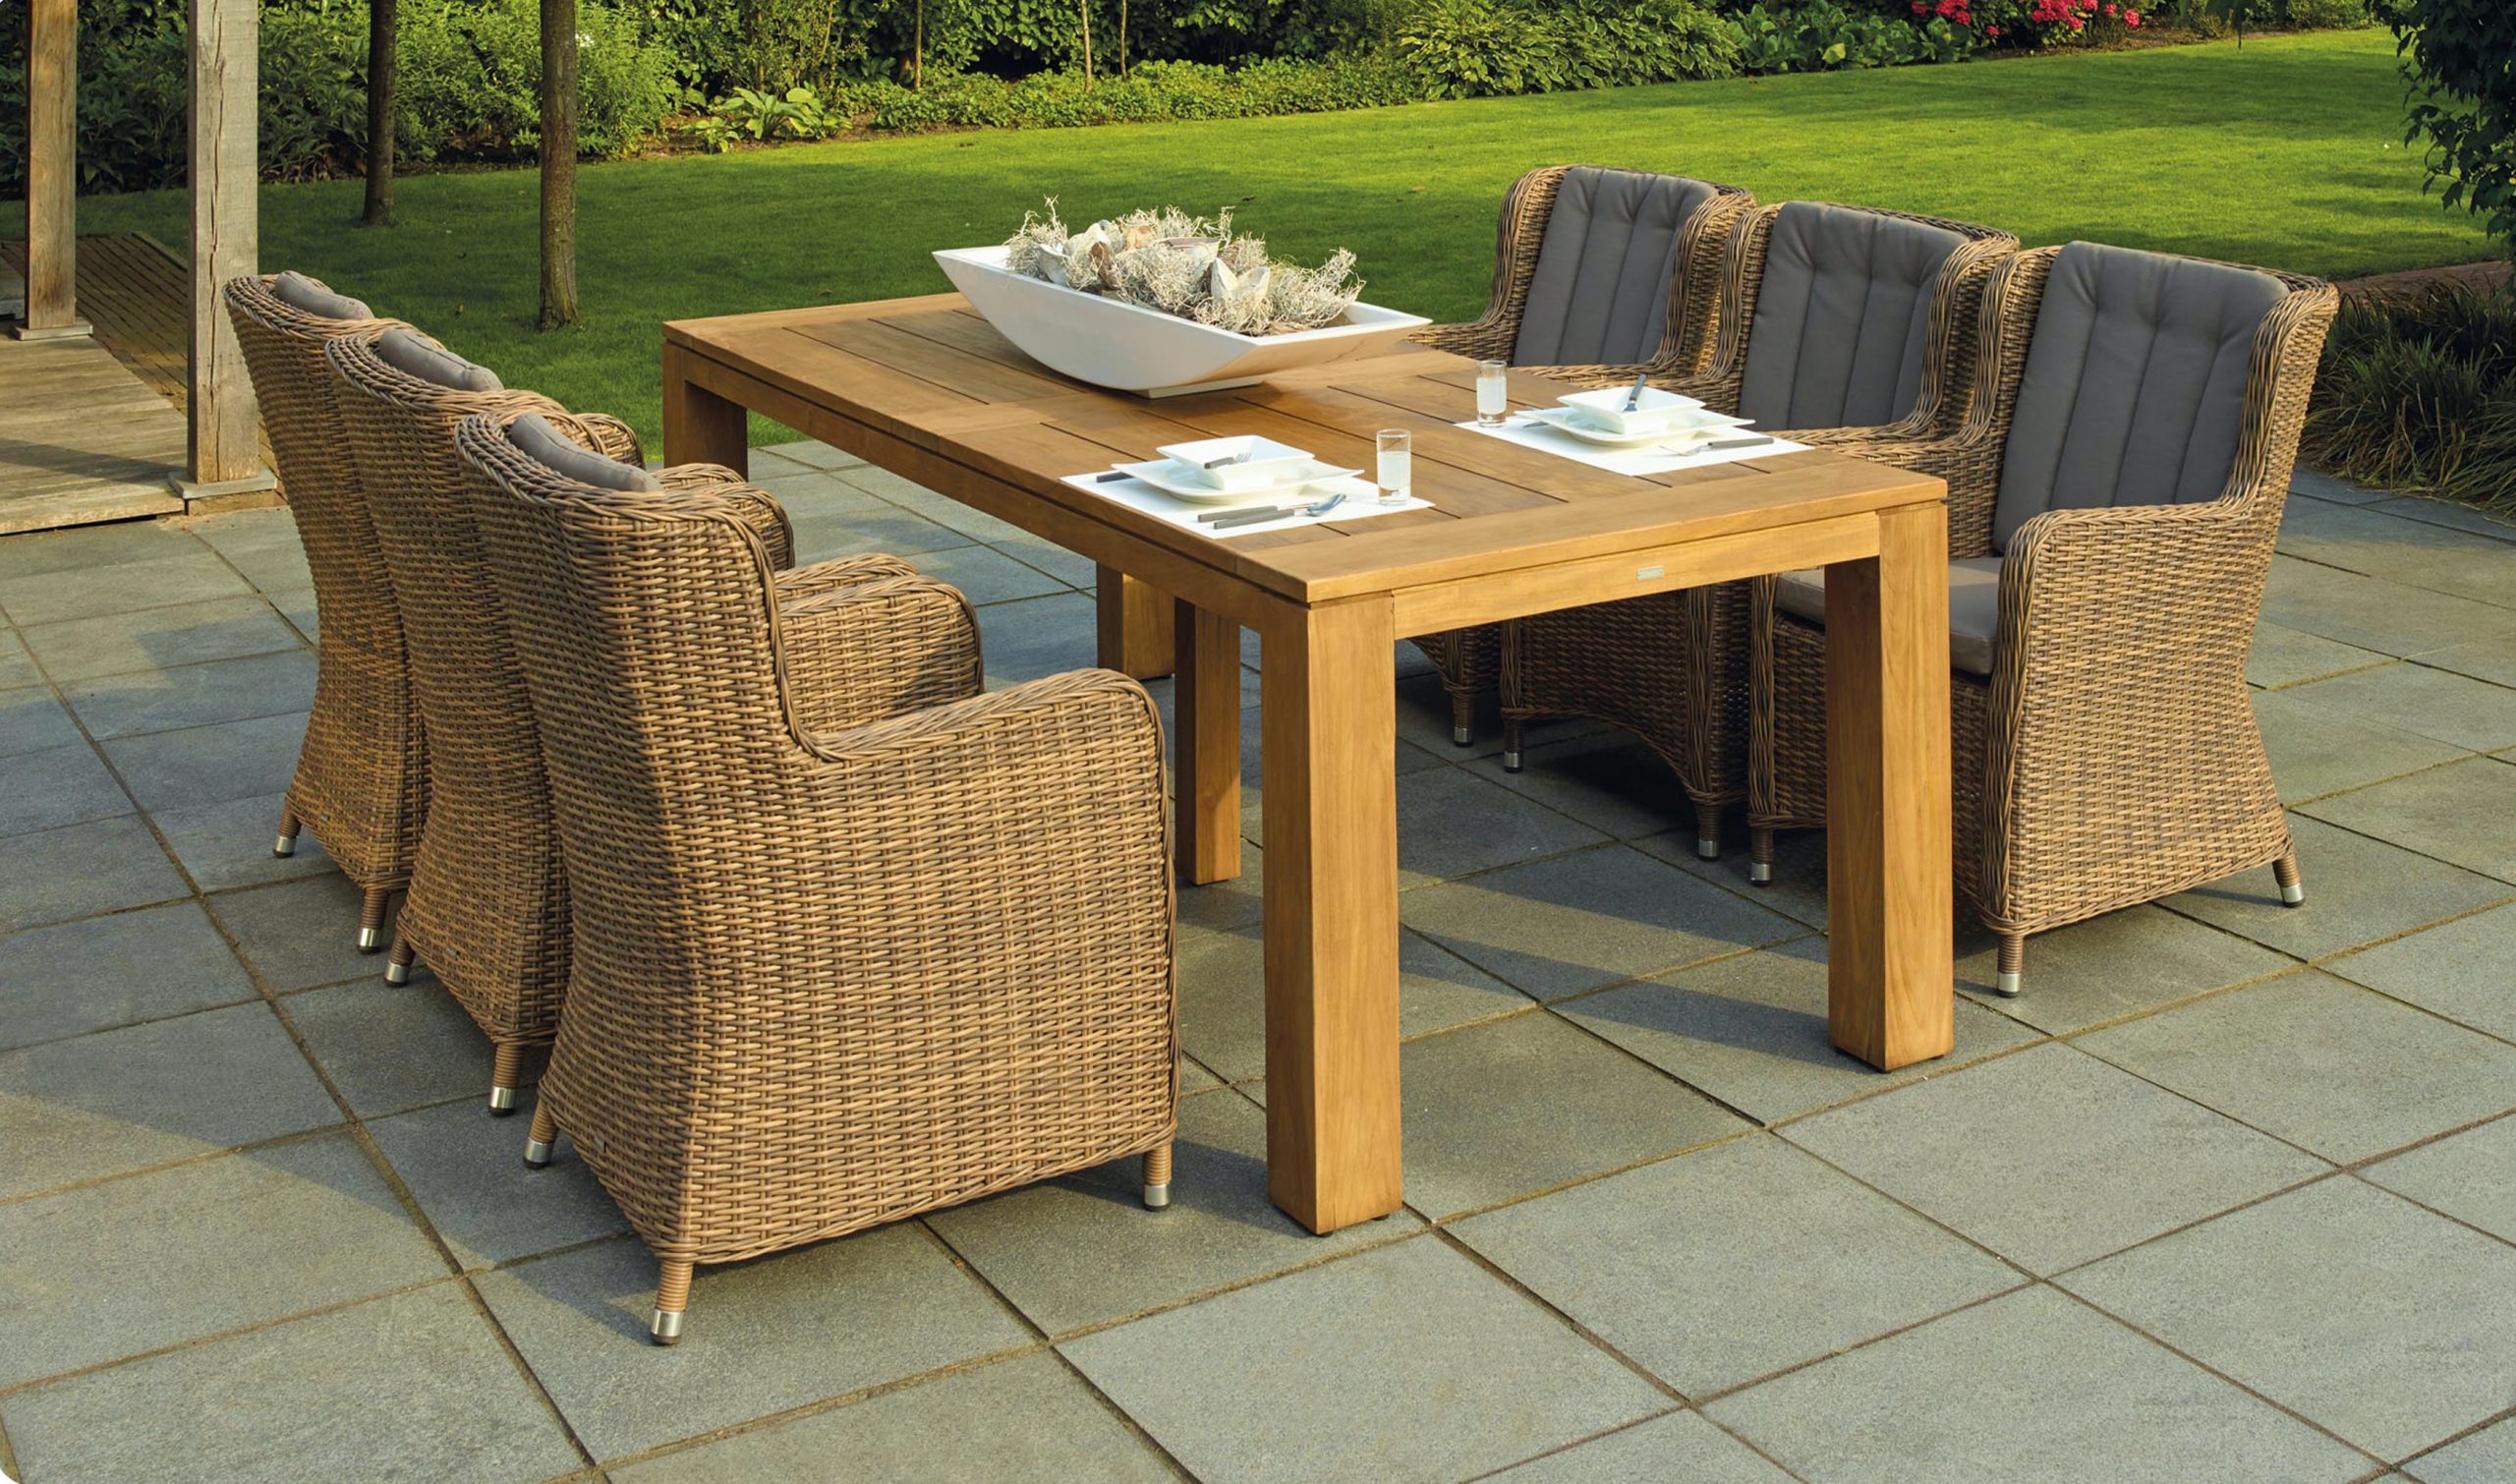 6 Types Of Patio Furniture That Will Enhance Your Outdoor Space